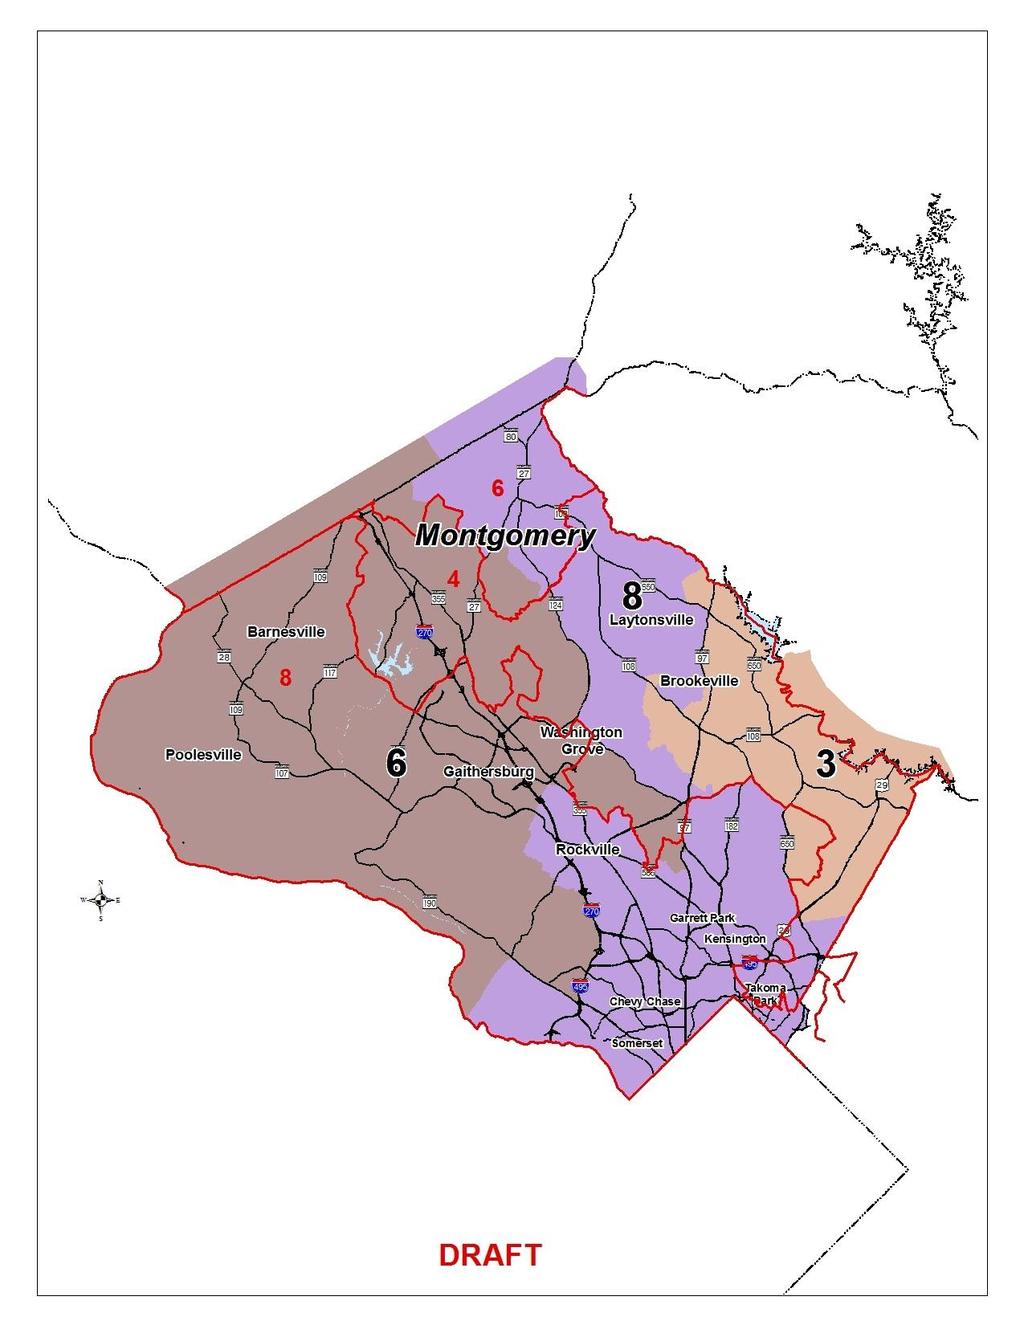 Districts 6 & 8: Montgomery County Area Configured to reflect the North-South connections between Montgomery County, the I-270 Corridor, and western portions of the State.